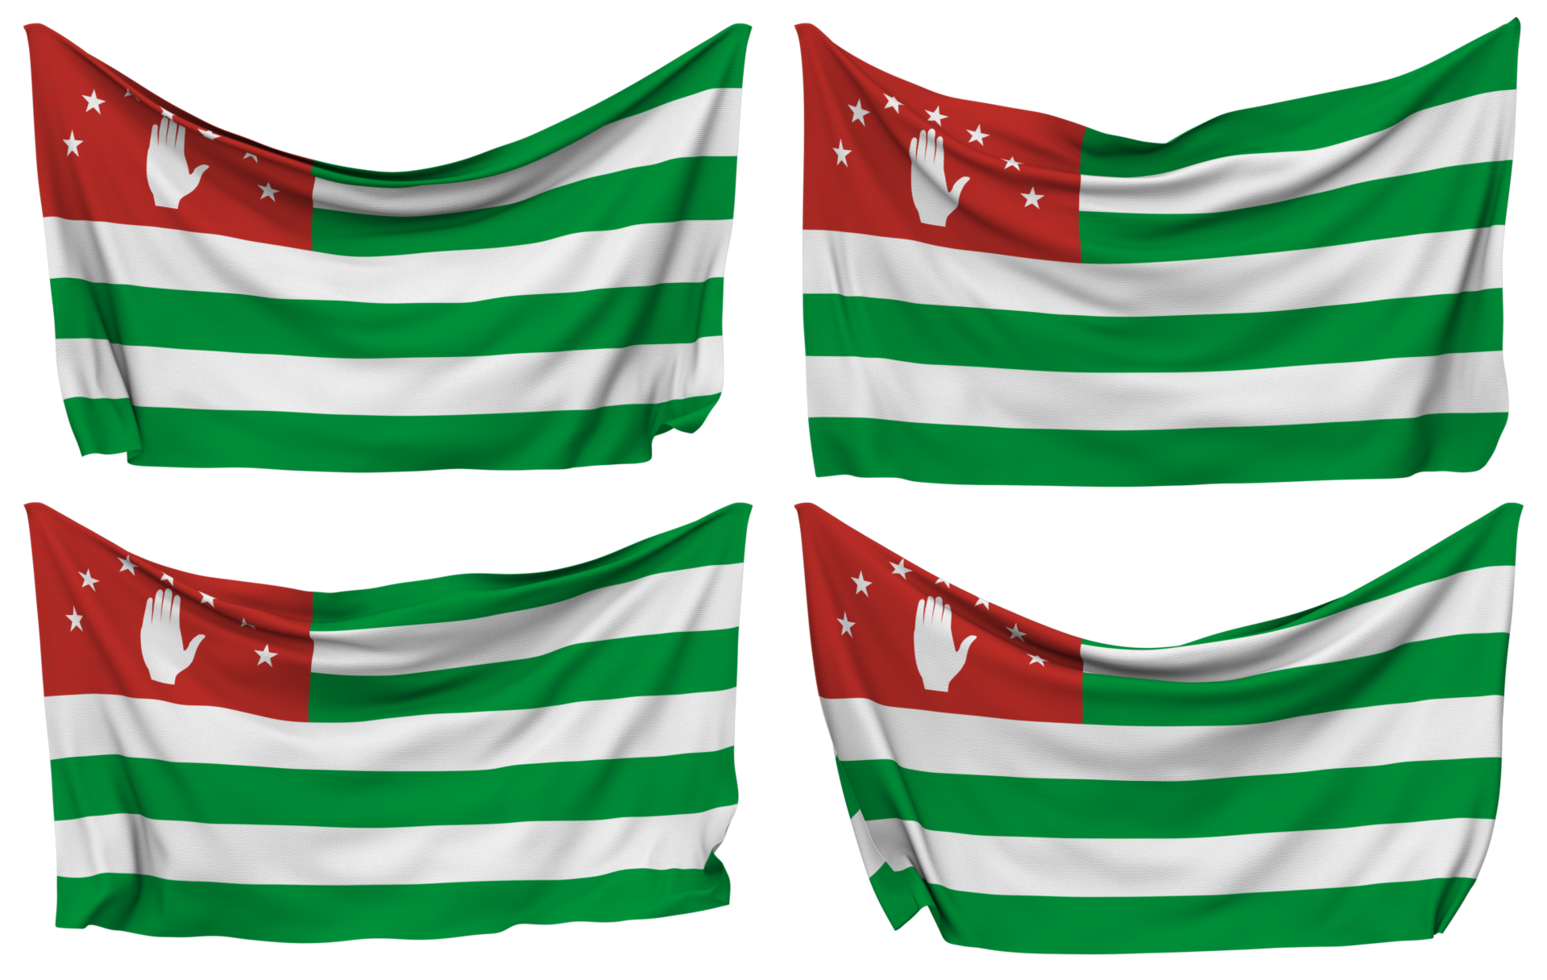 Abkhazia Pined Flag from Corners, Isolated with Different Waving Variations, 3D Rendering png